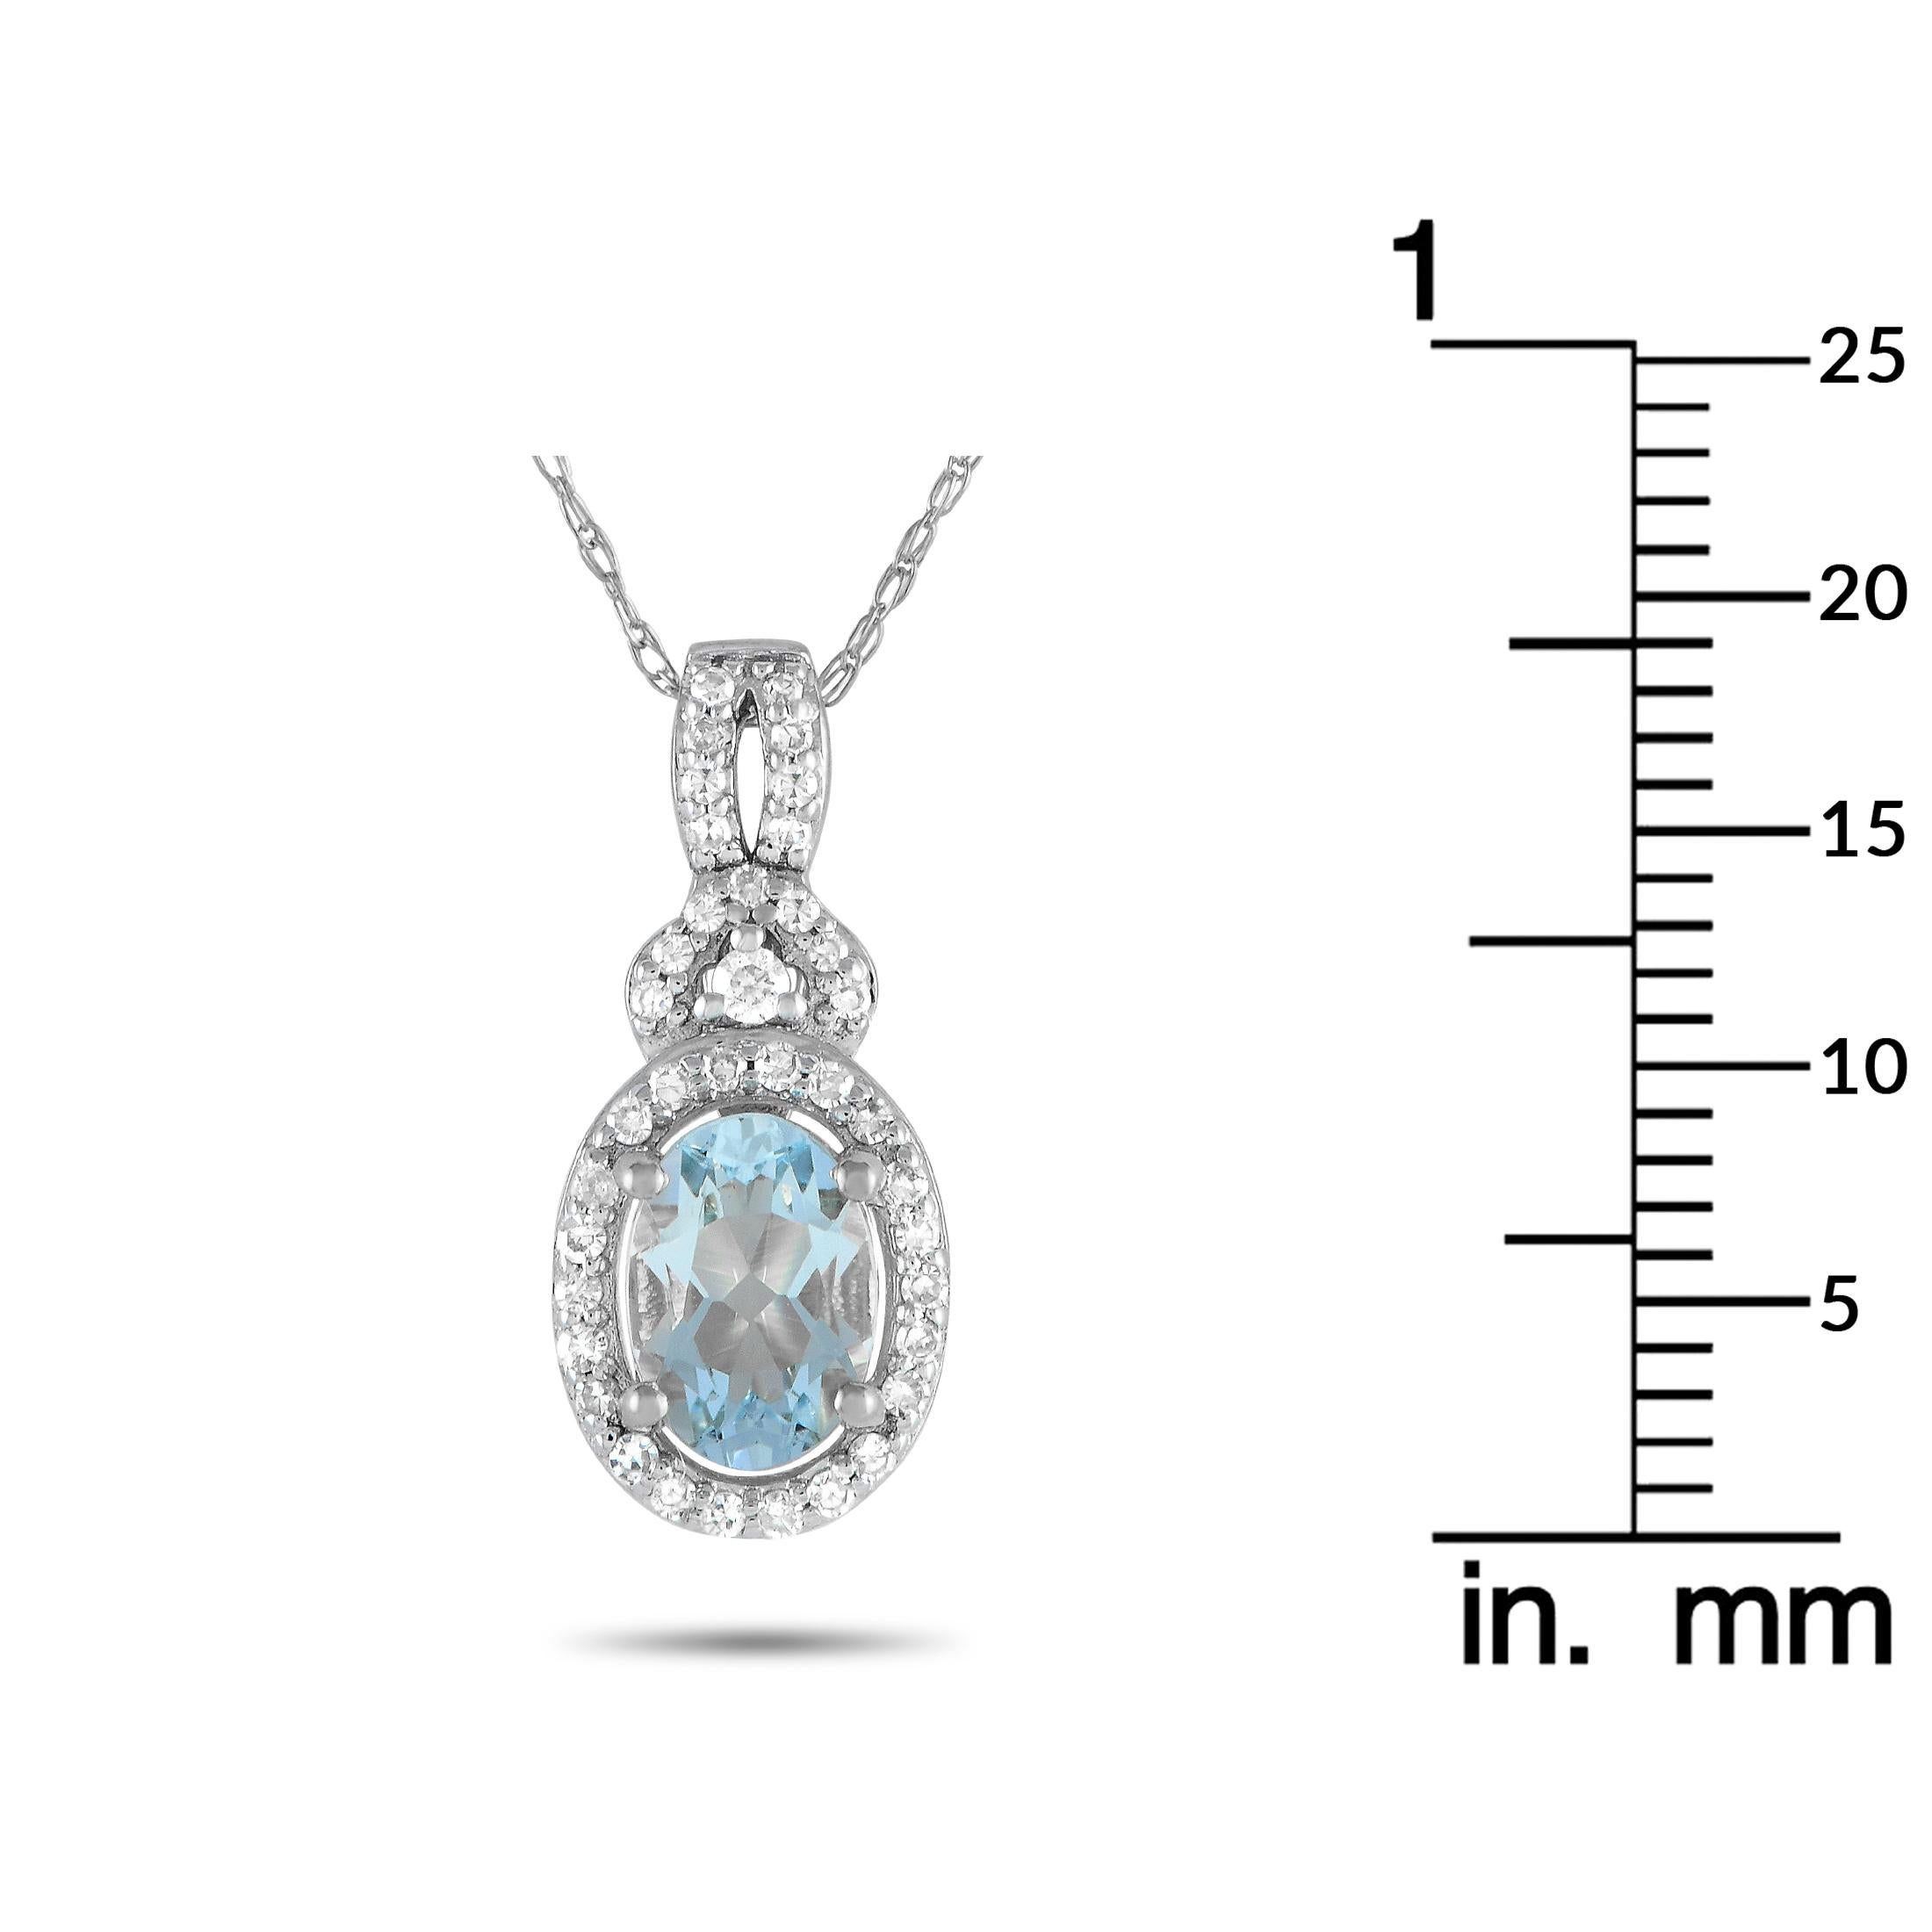 LB Exclusive 14K White Gold 0.15ct Diamond Pendant Necklace PD4-15738WAQ In New Condition For Sale In Southampton, PA